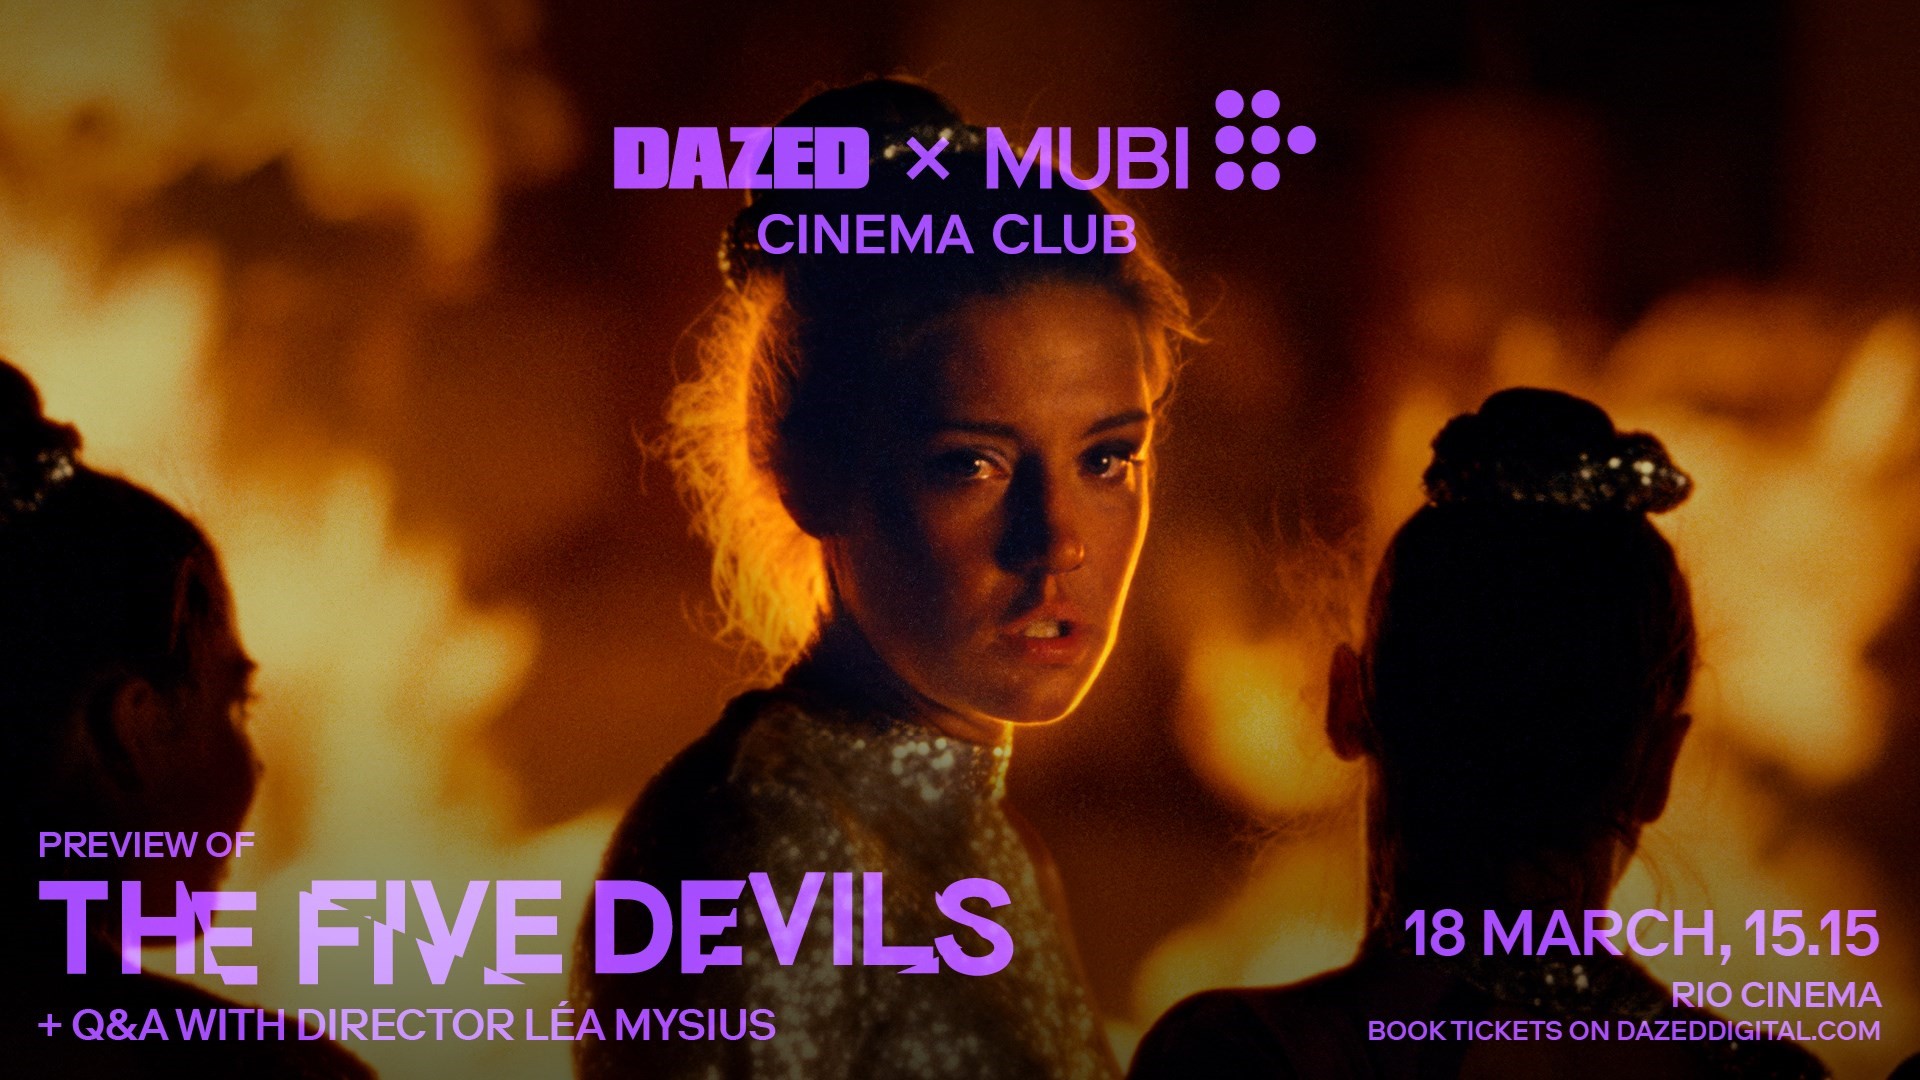 Get tickets for a preview of queer, witchy fantasy The Five Devils | Dazed